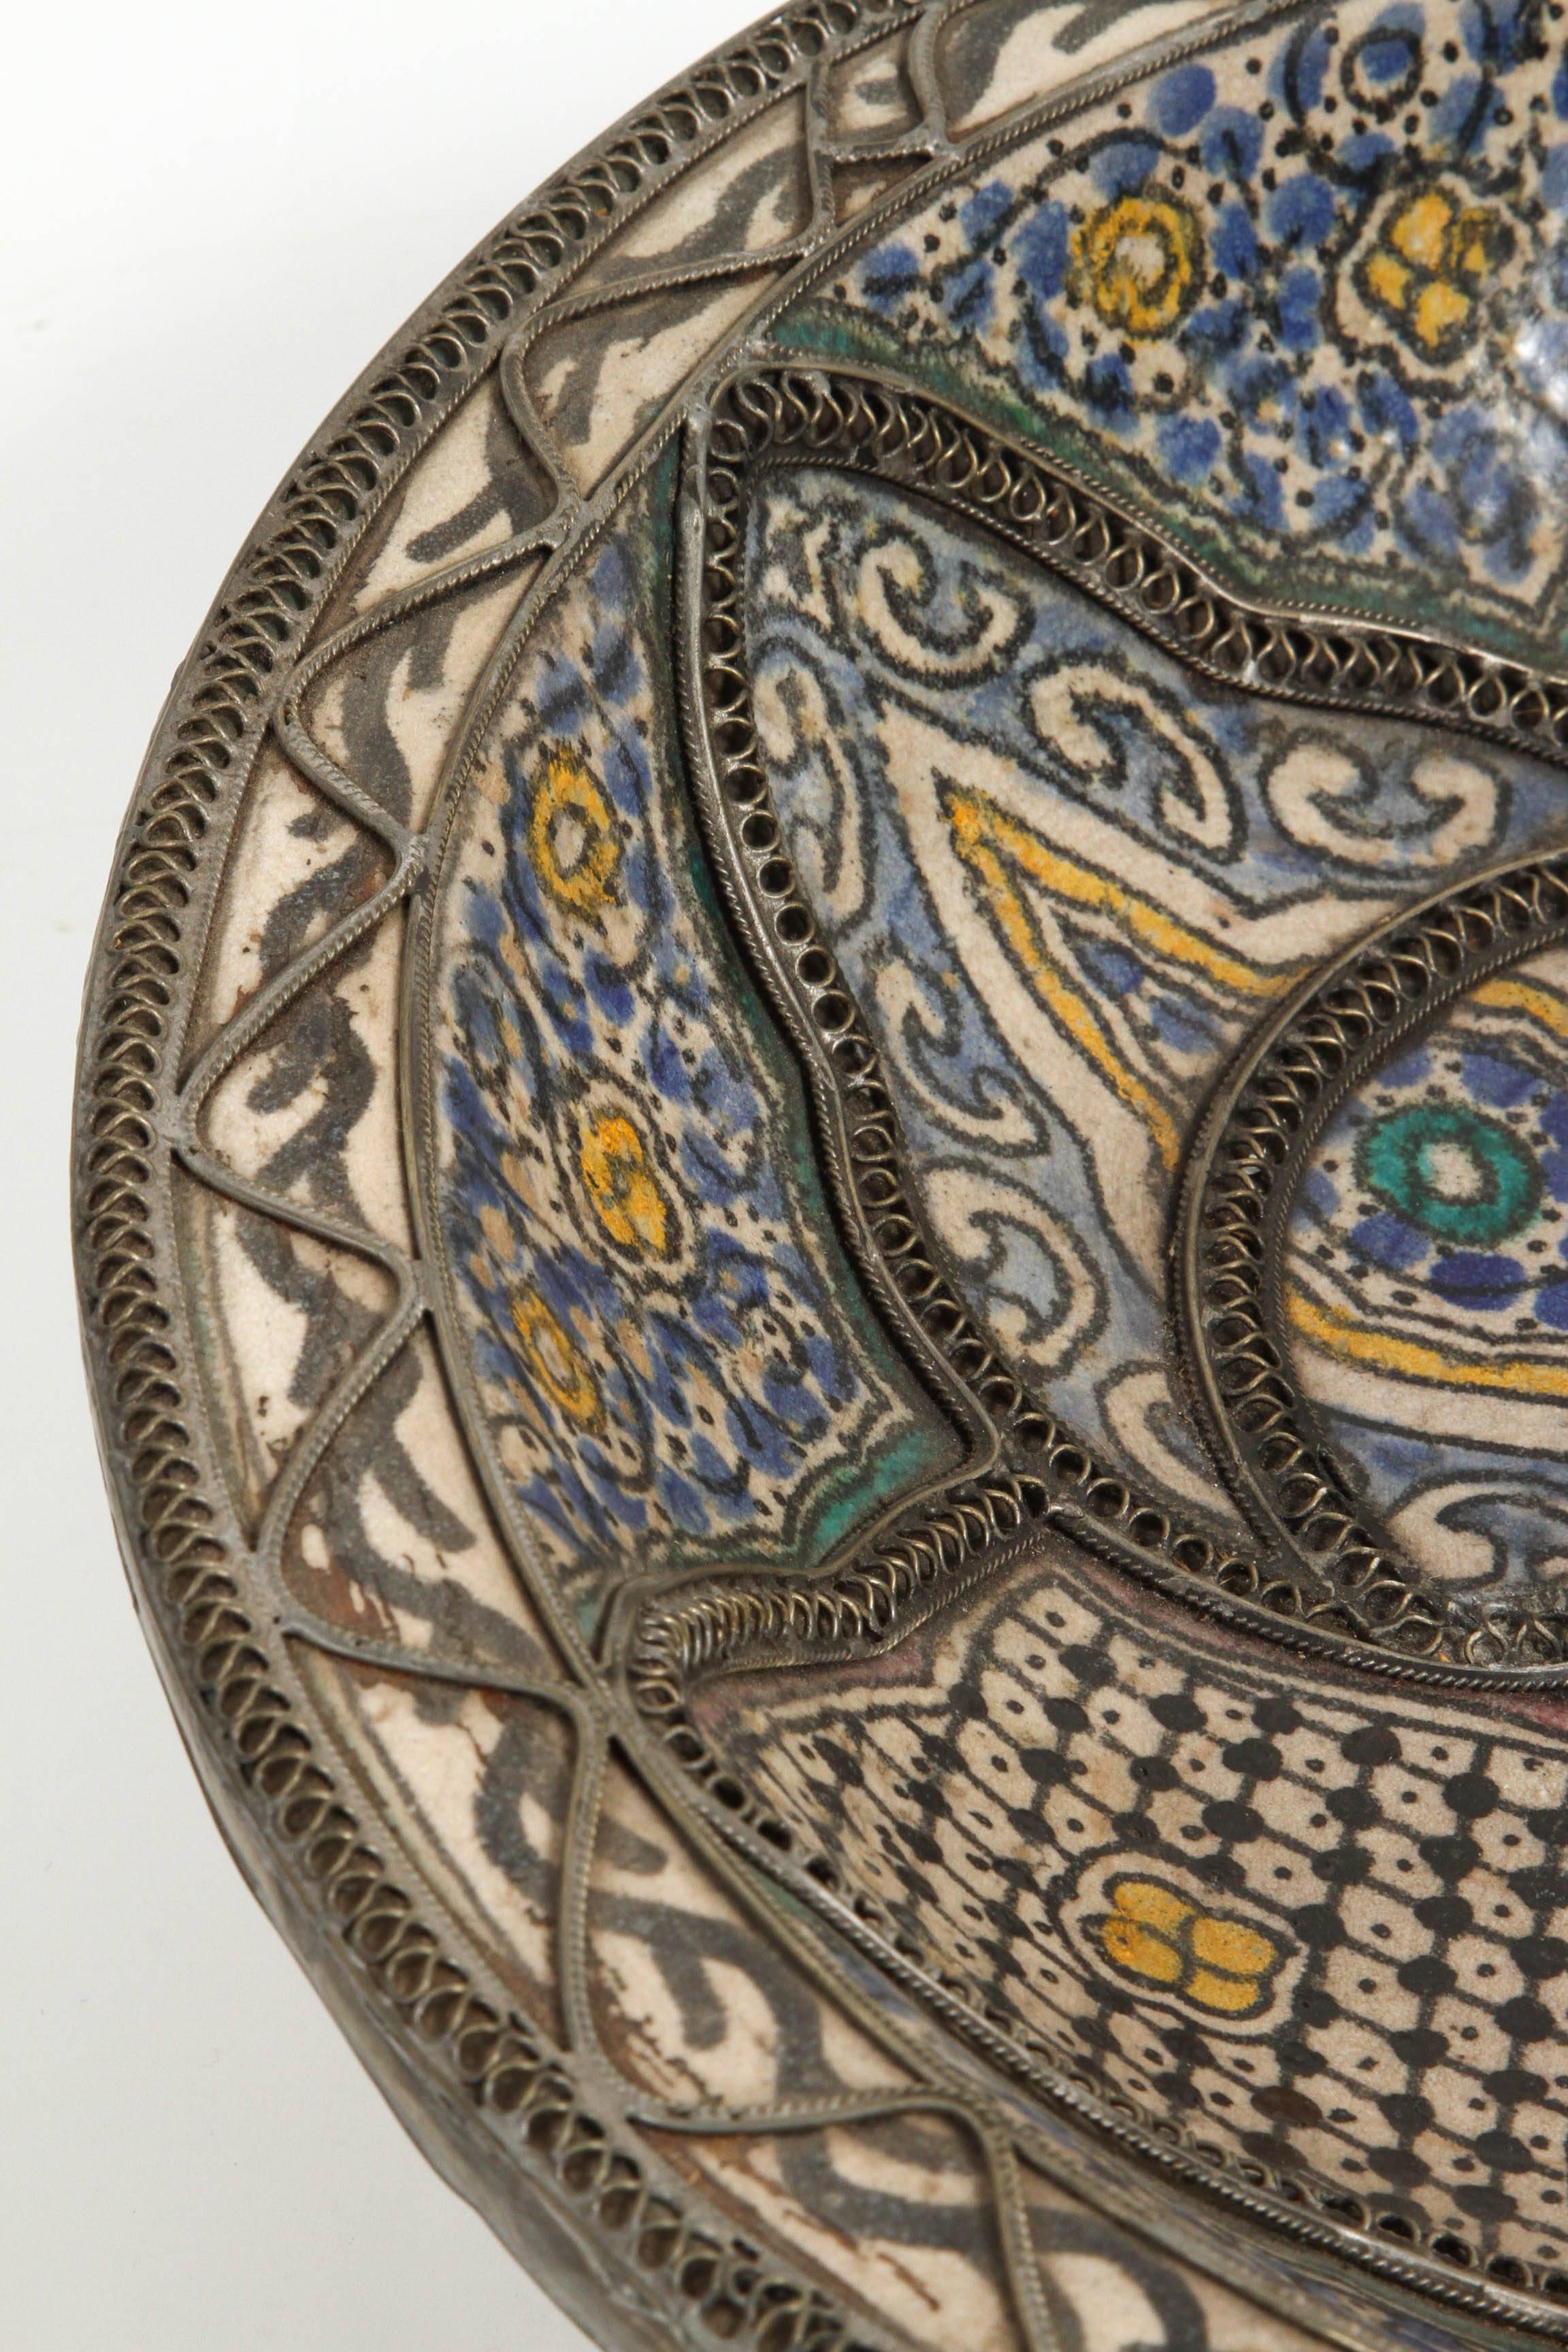 Hand-Crafted Large Decorative Ceramic Plates from Fez